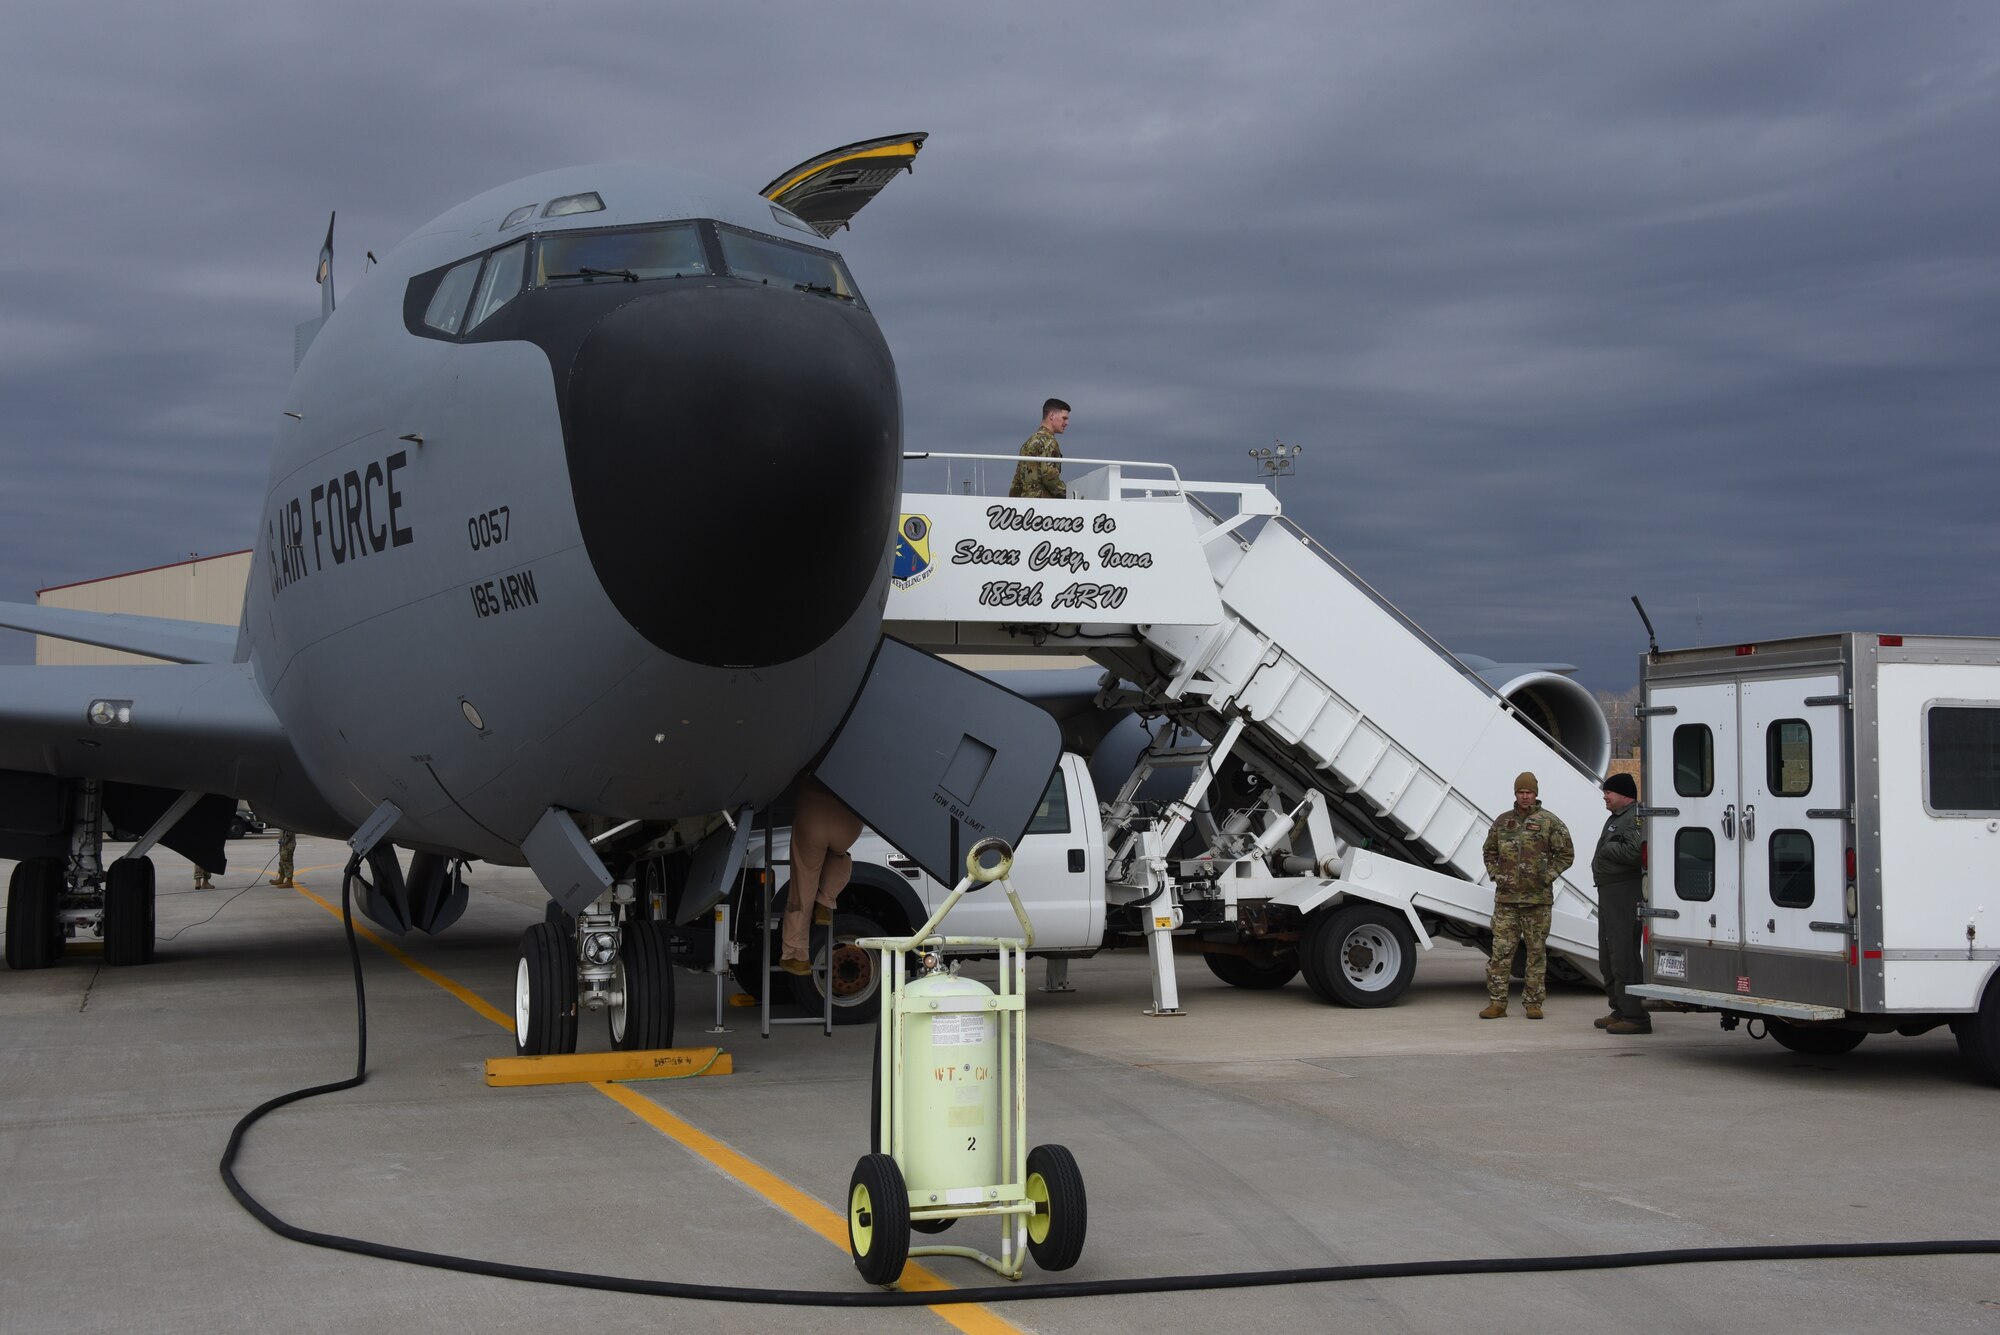 Iowa Air National Guard crew chiefs prepare a U.S. Air Force KC-135 for departure from Sioux City, Iowa, on its way to a deployment in Southwest Asia in support of U.S. Central Command operations April 19, 2022.